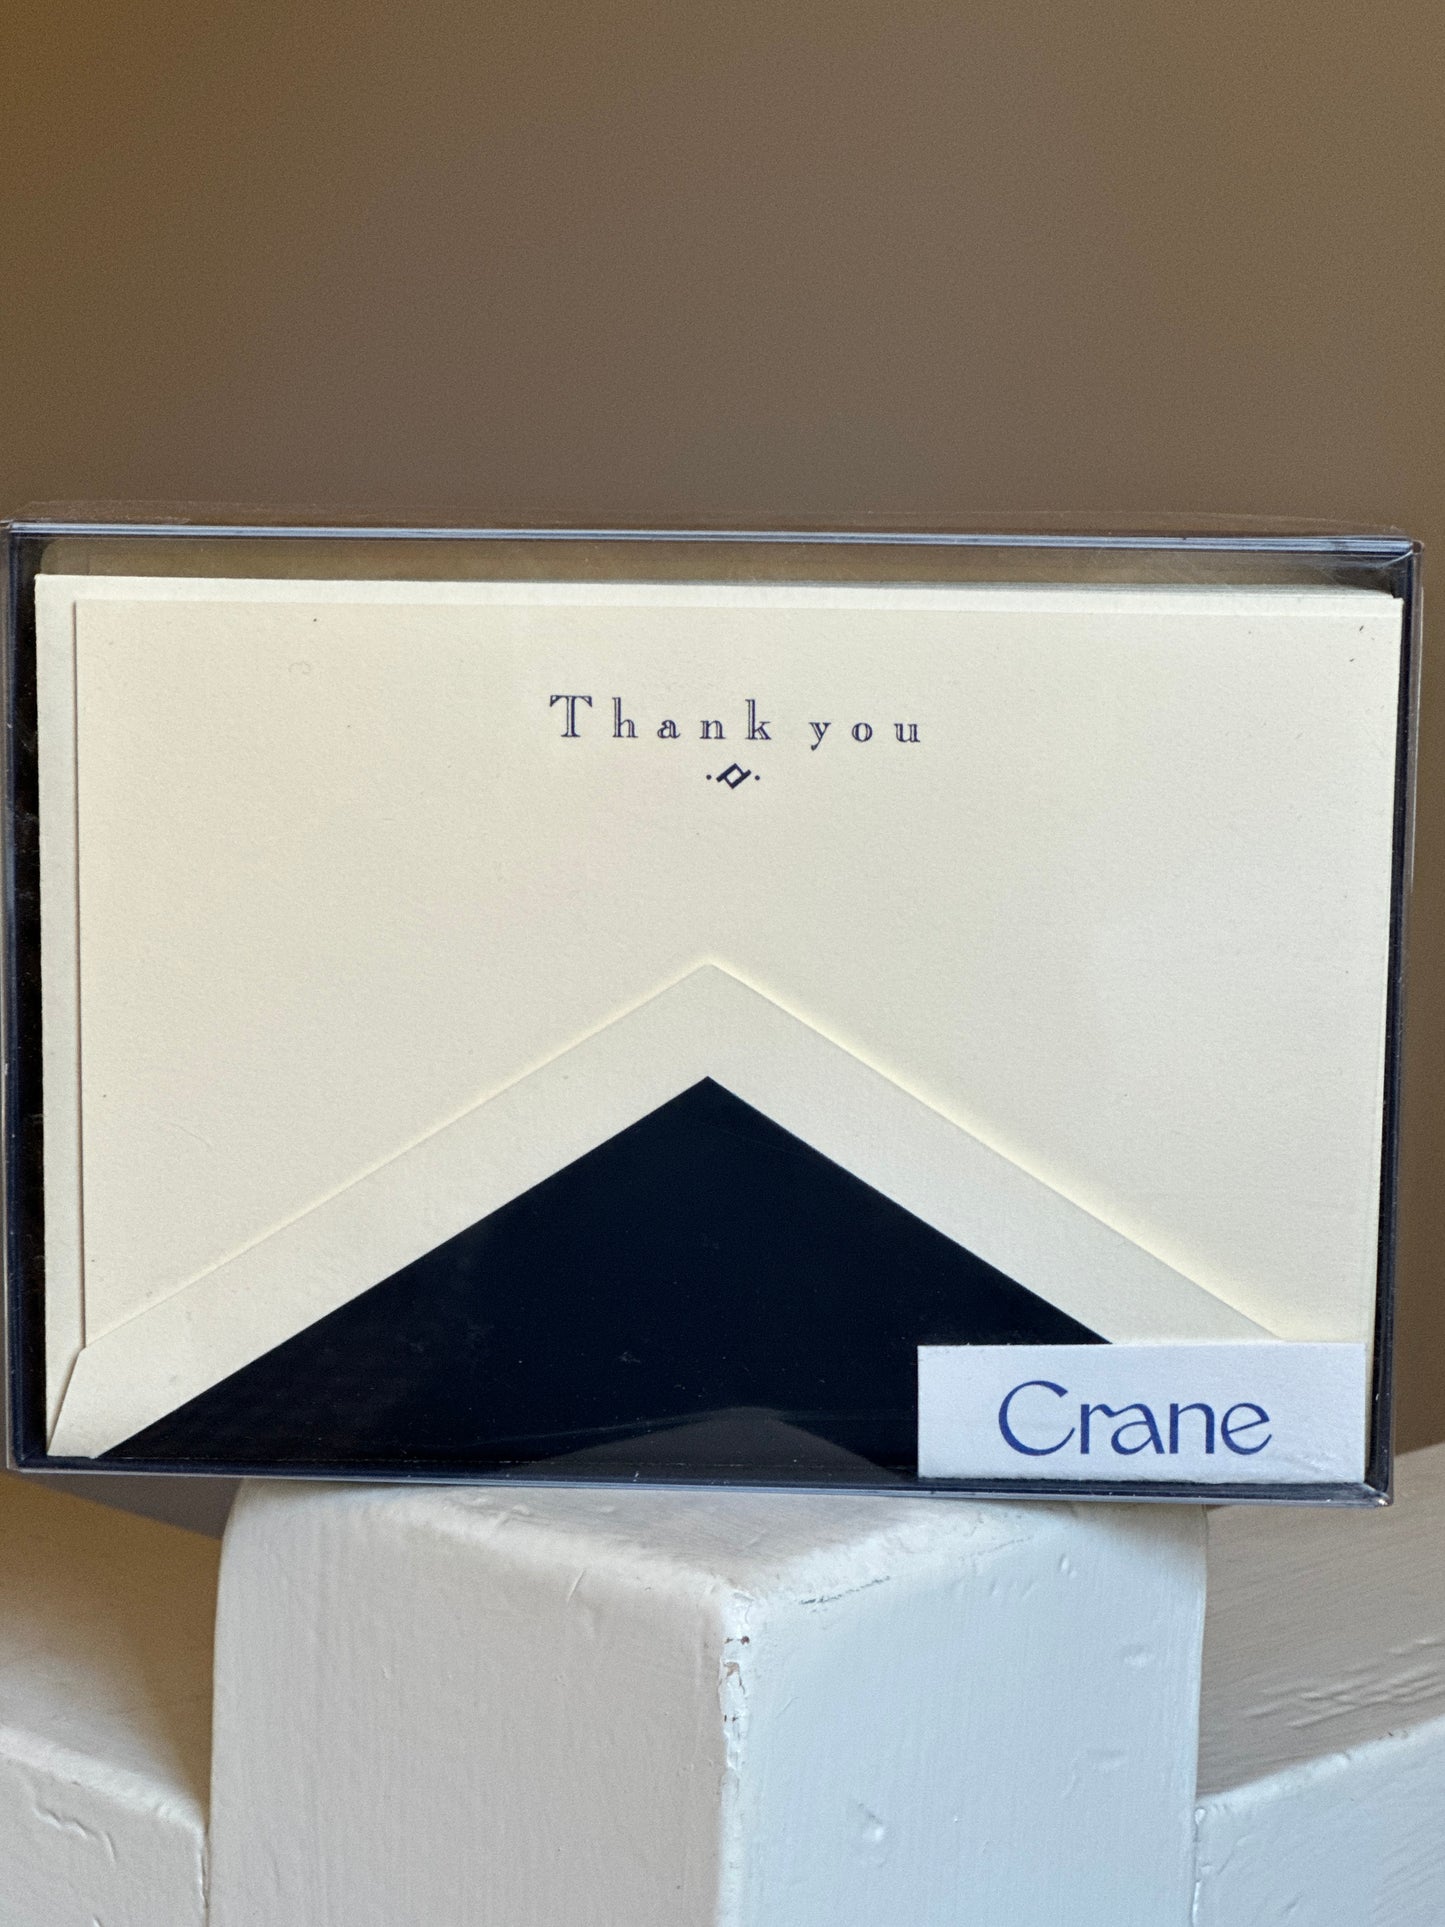 Thank you note card in Navy